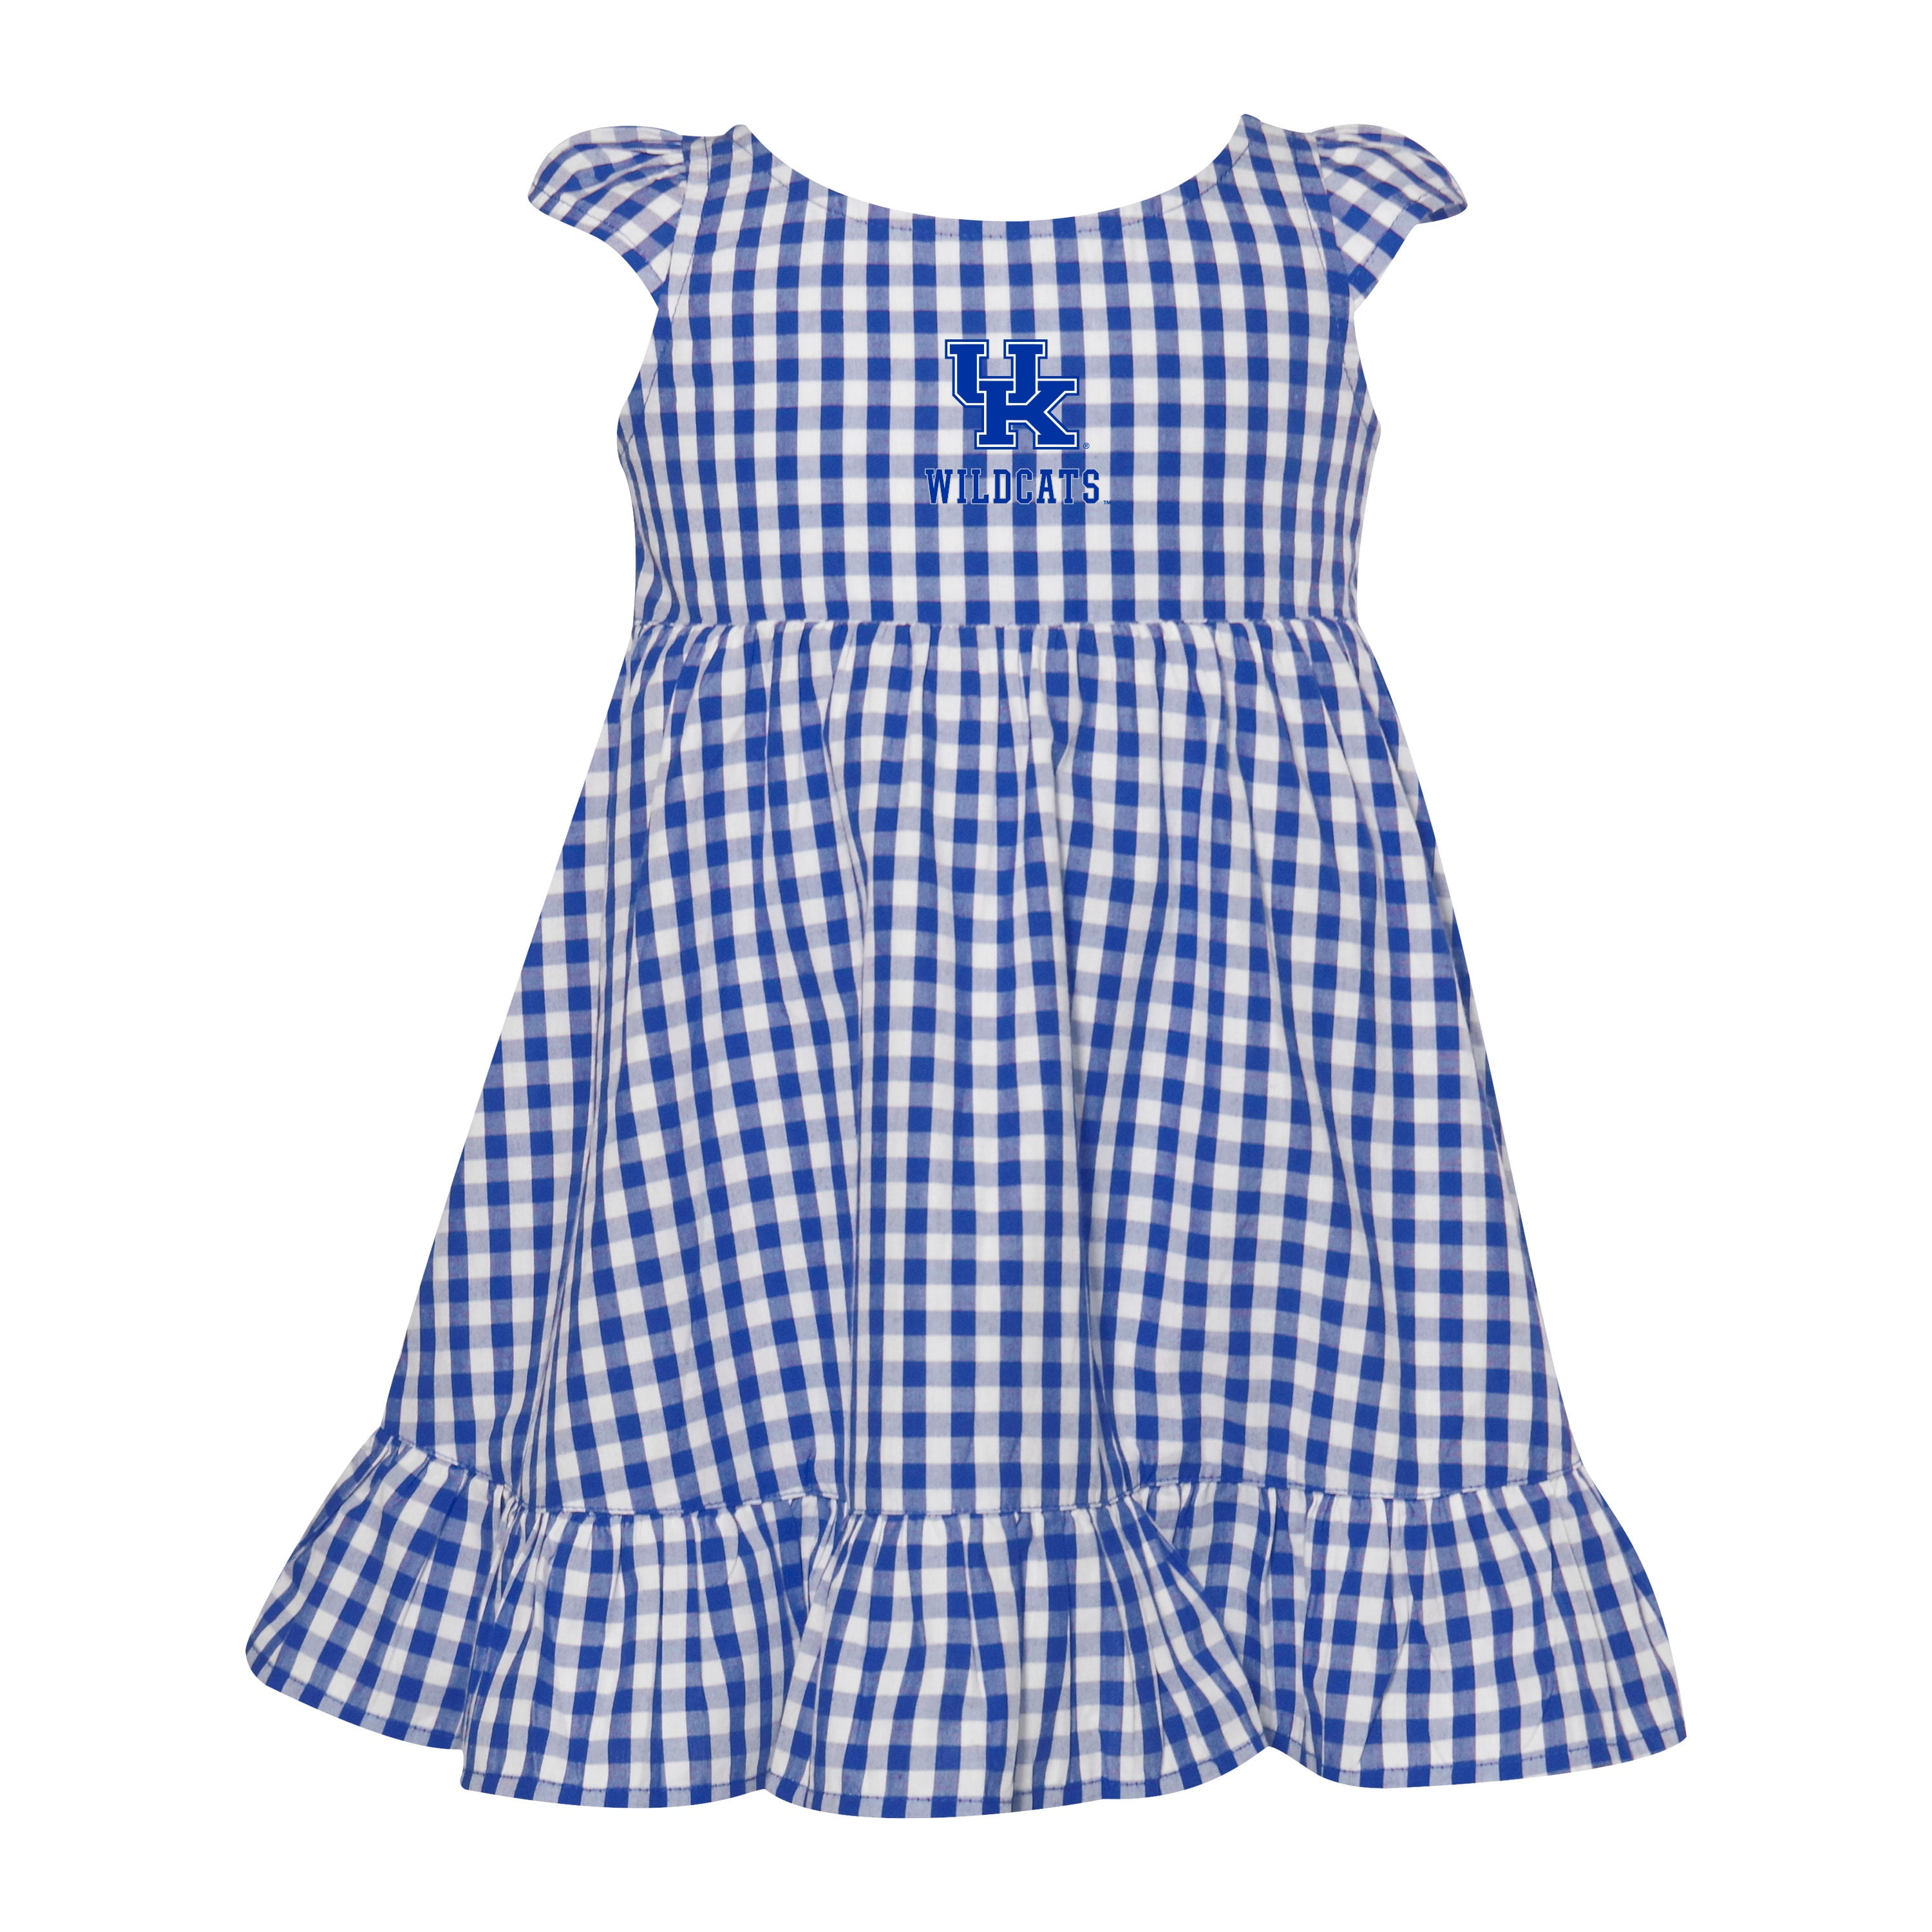 Baby Kentucky Outfit Blue Gingham Dress Baby UK Dress Kentucky Game Day Outfit Baby Wildcat Dress Girls Game Day Dress